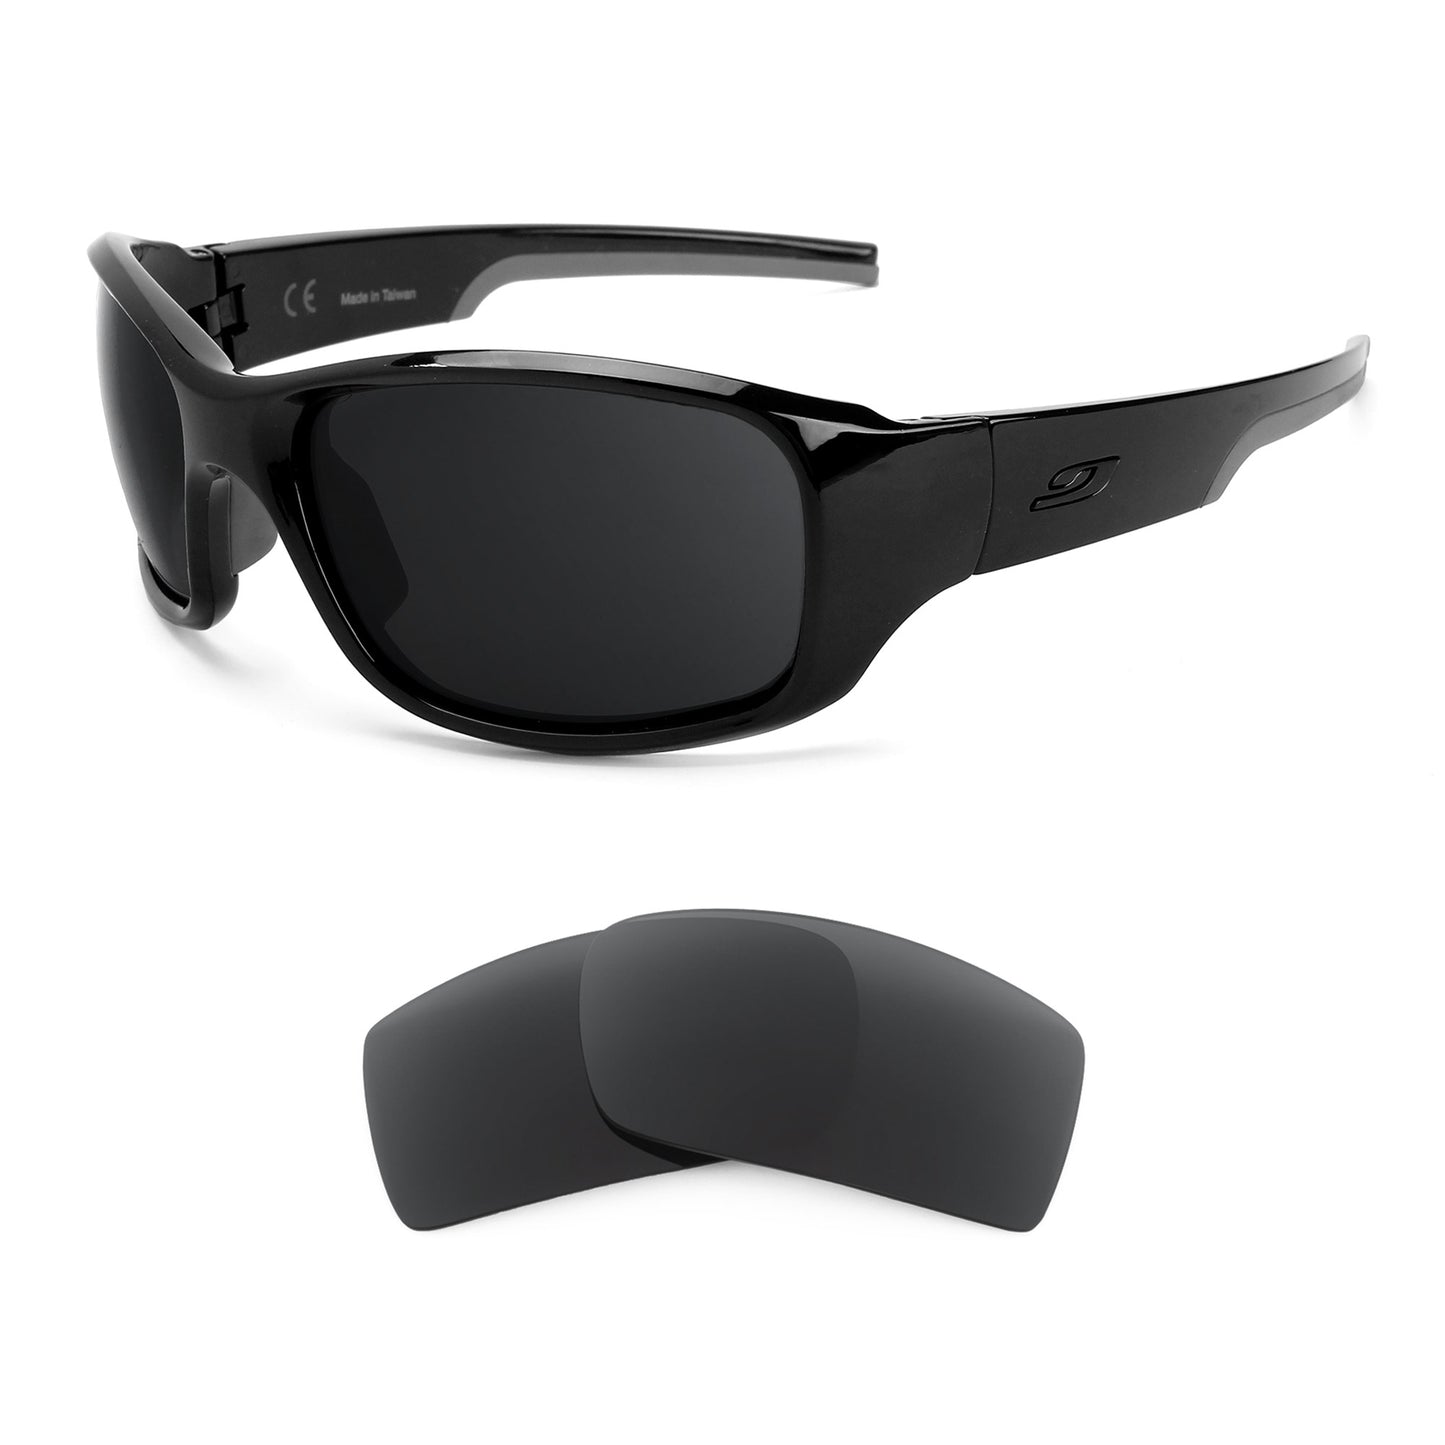 Julbo Stunt sunglasses with replacement lenses